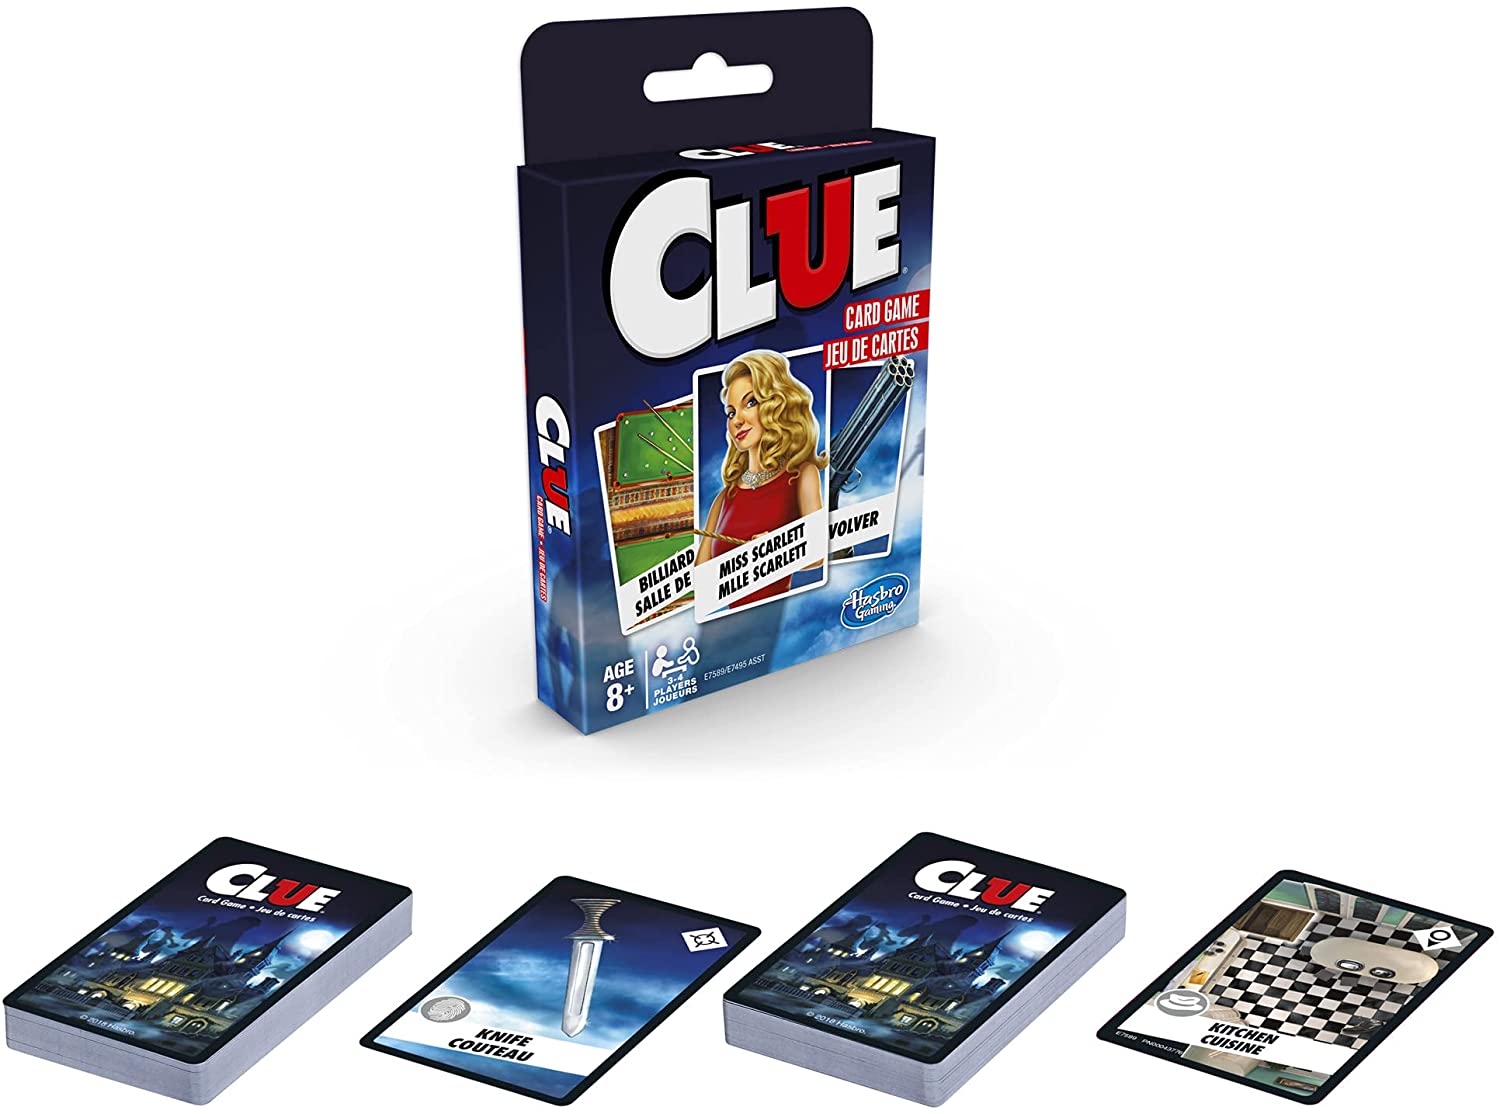 Find out about Clue: Card Game